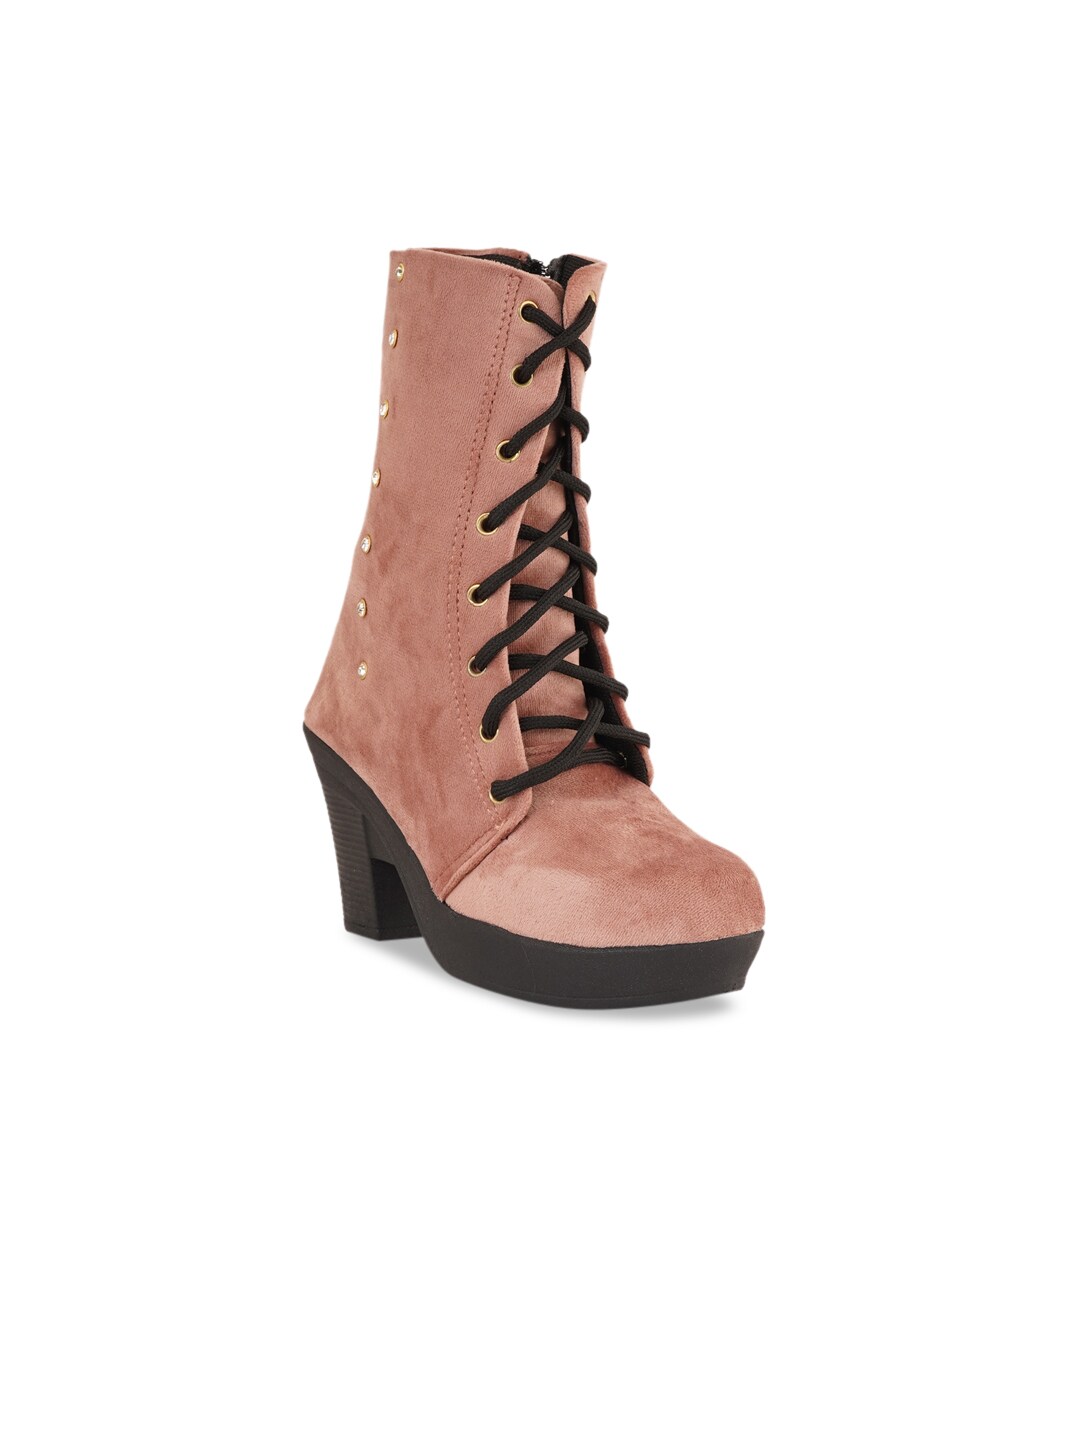 Walkfree Women Peach-Coloured Suede High-Top Flat Boots Price in India